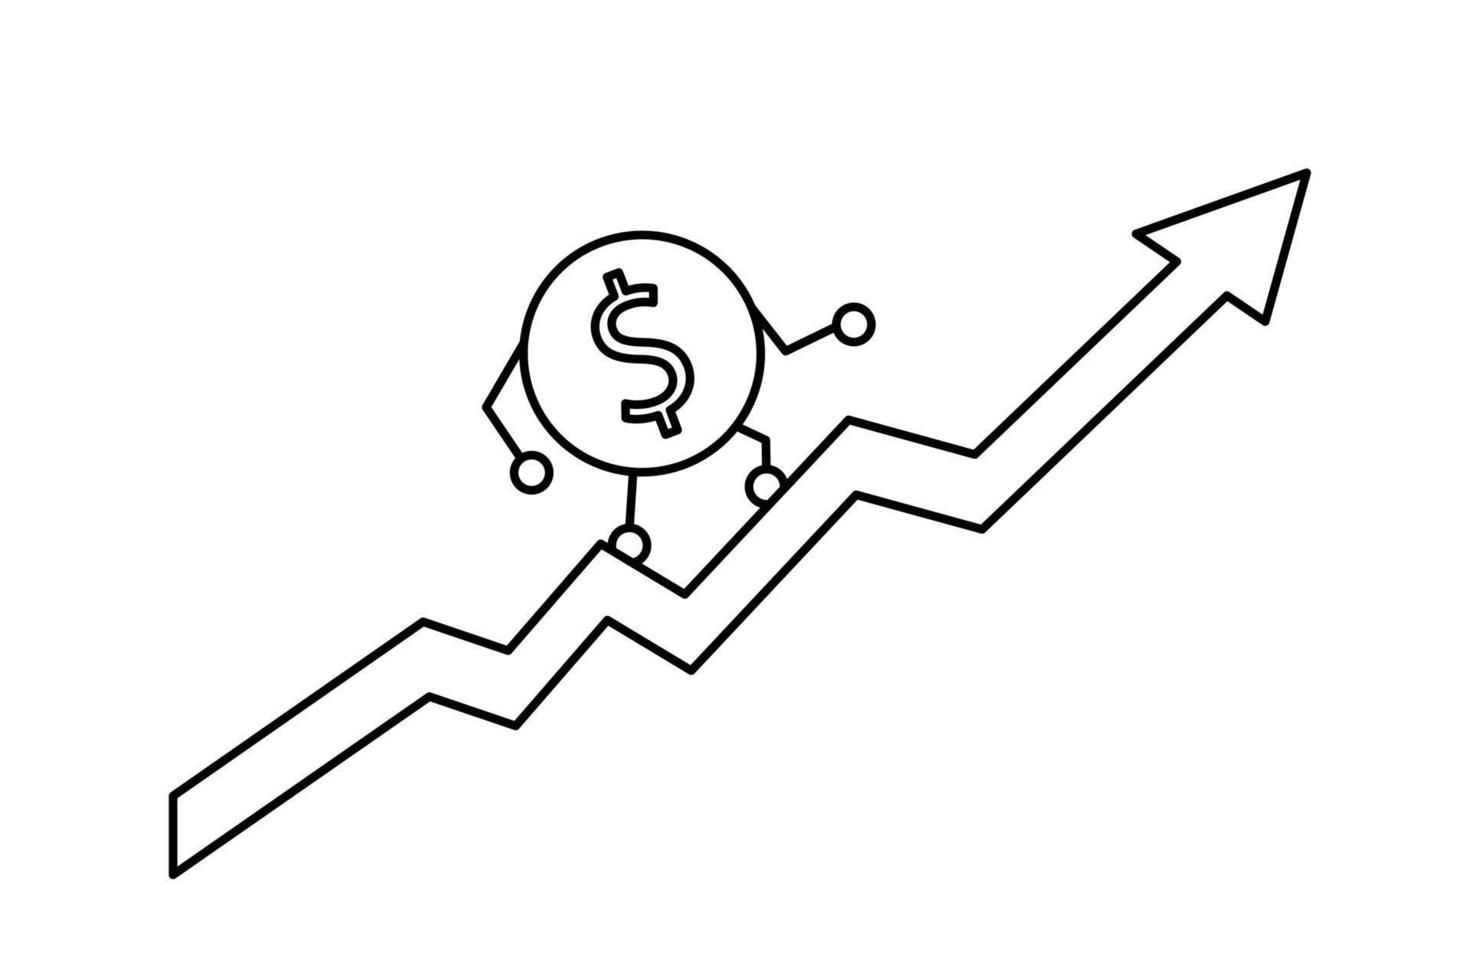 The dollar coin rises up the red arrow. The concept of a successful business. Outline illustration vector